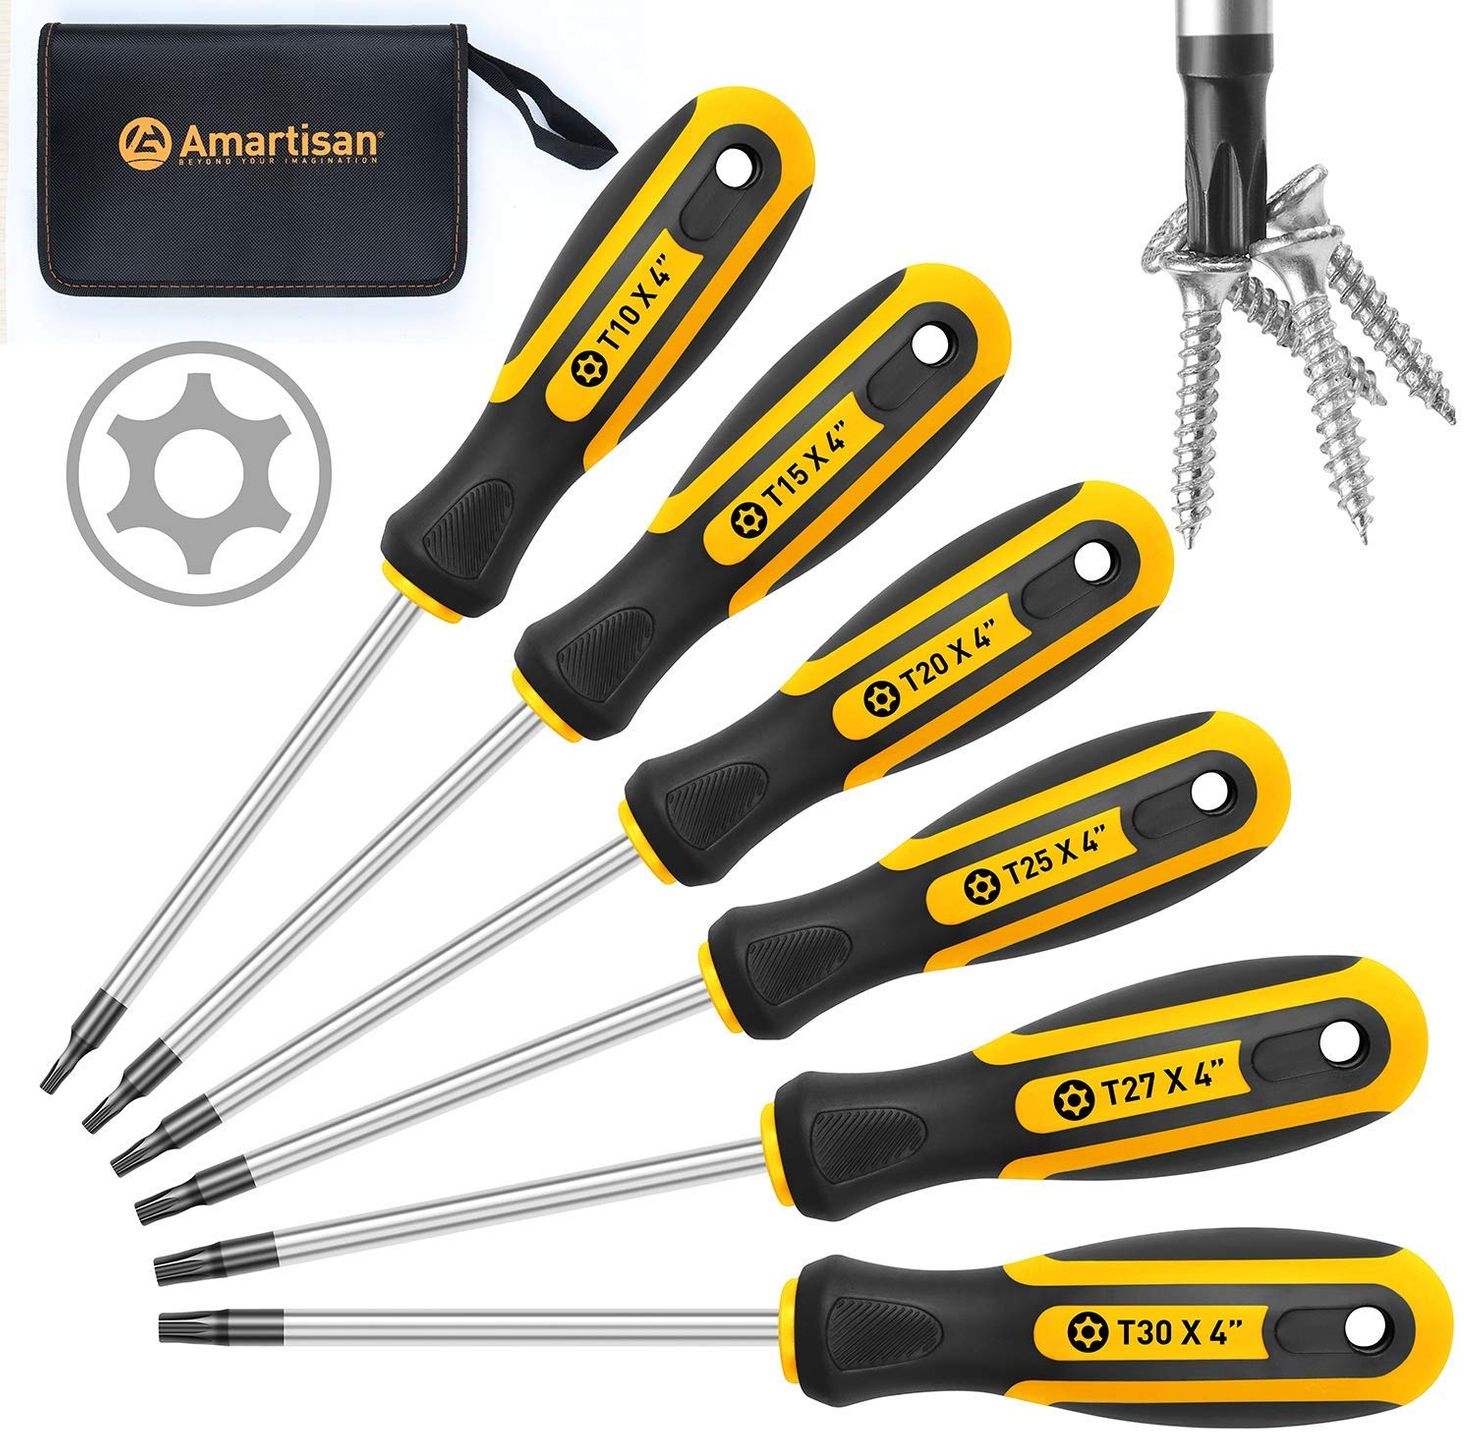 6 Piece Precision Small Screwdriver Set 2 x Philips 4 x Normal Flat Blade case 